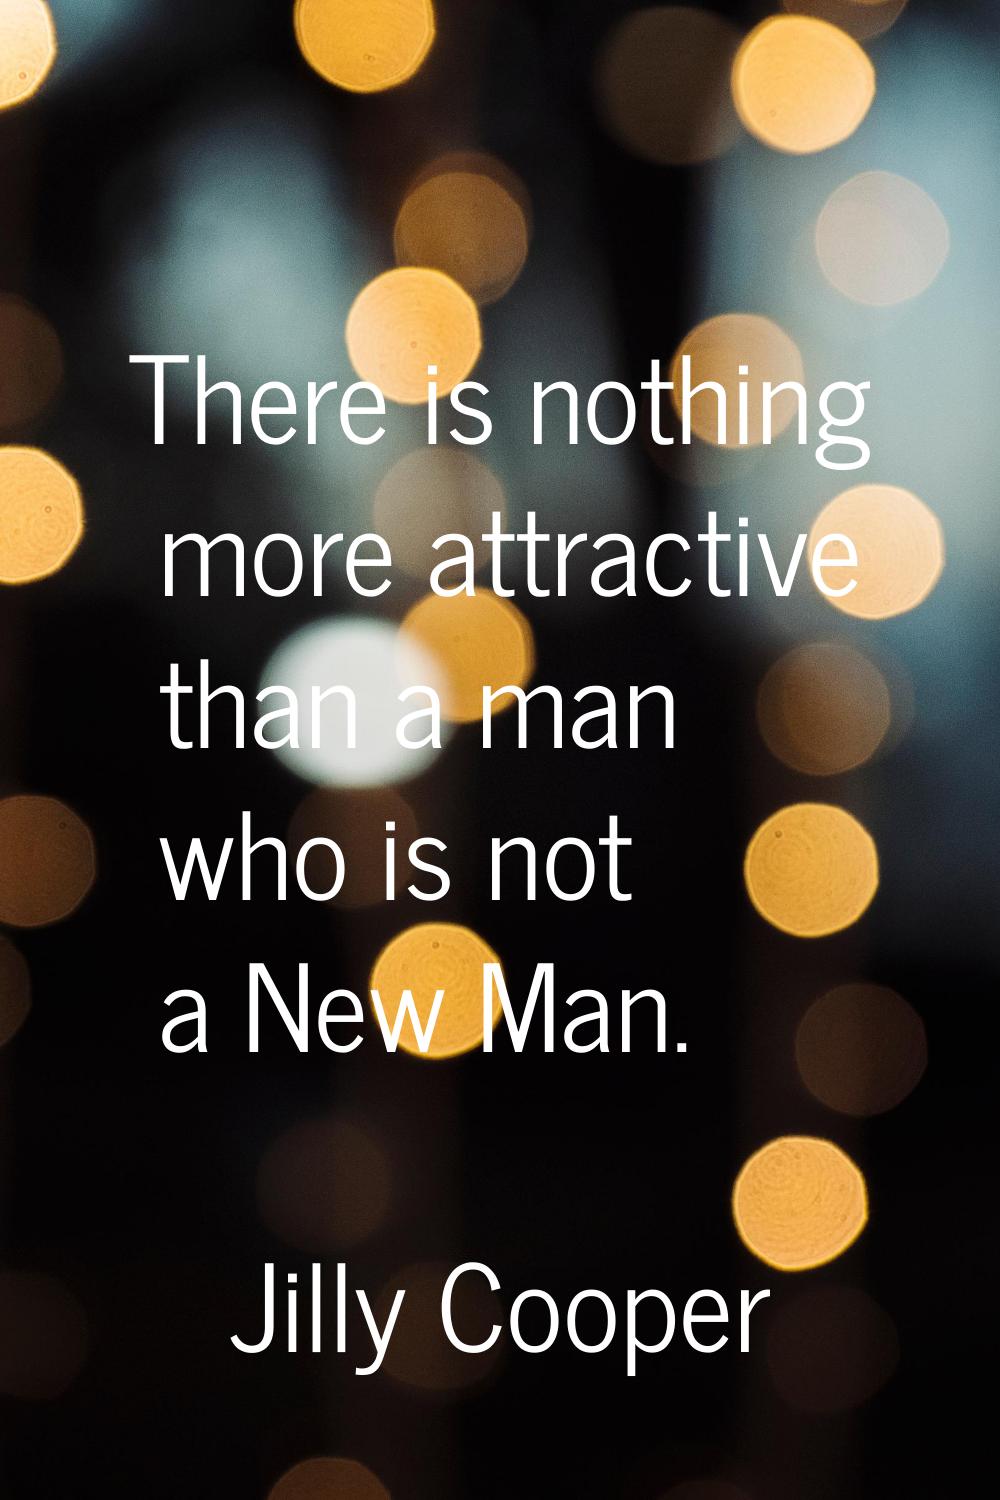 There is nothing more attractive than a man who is not a New Man.